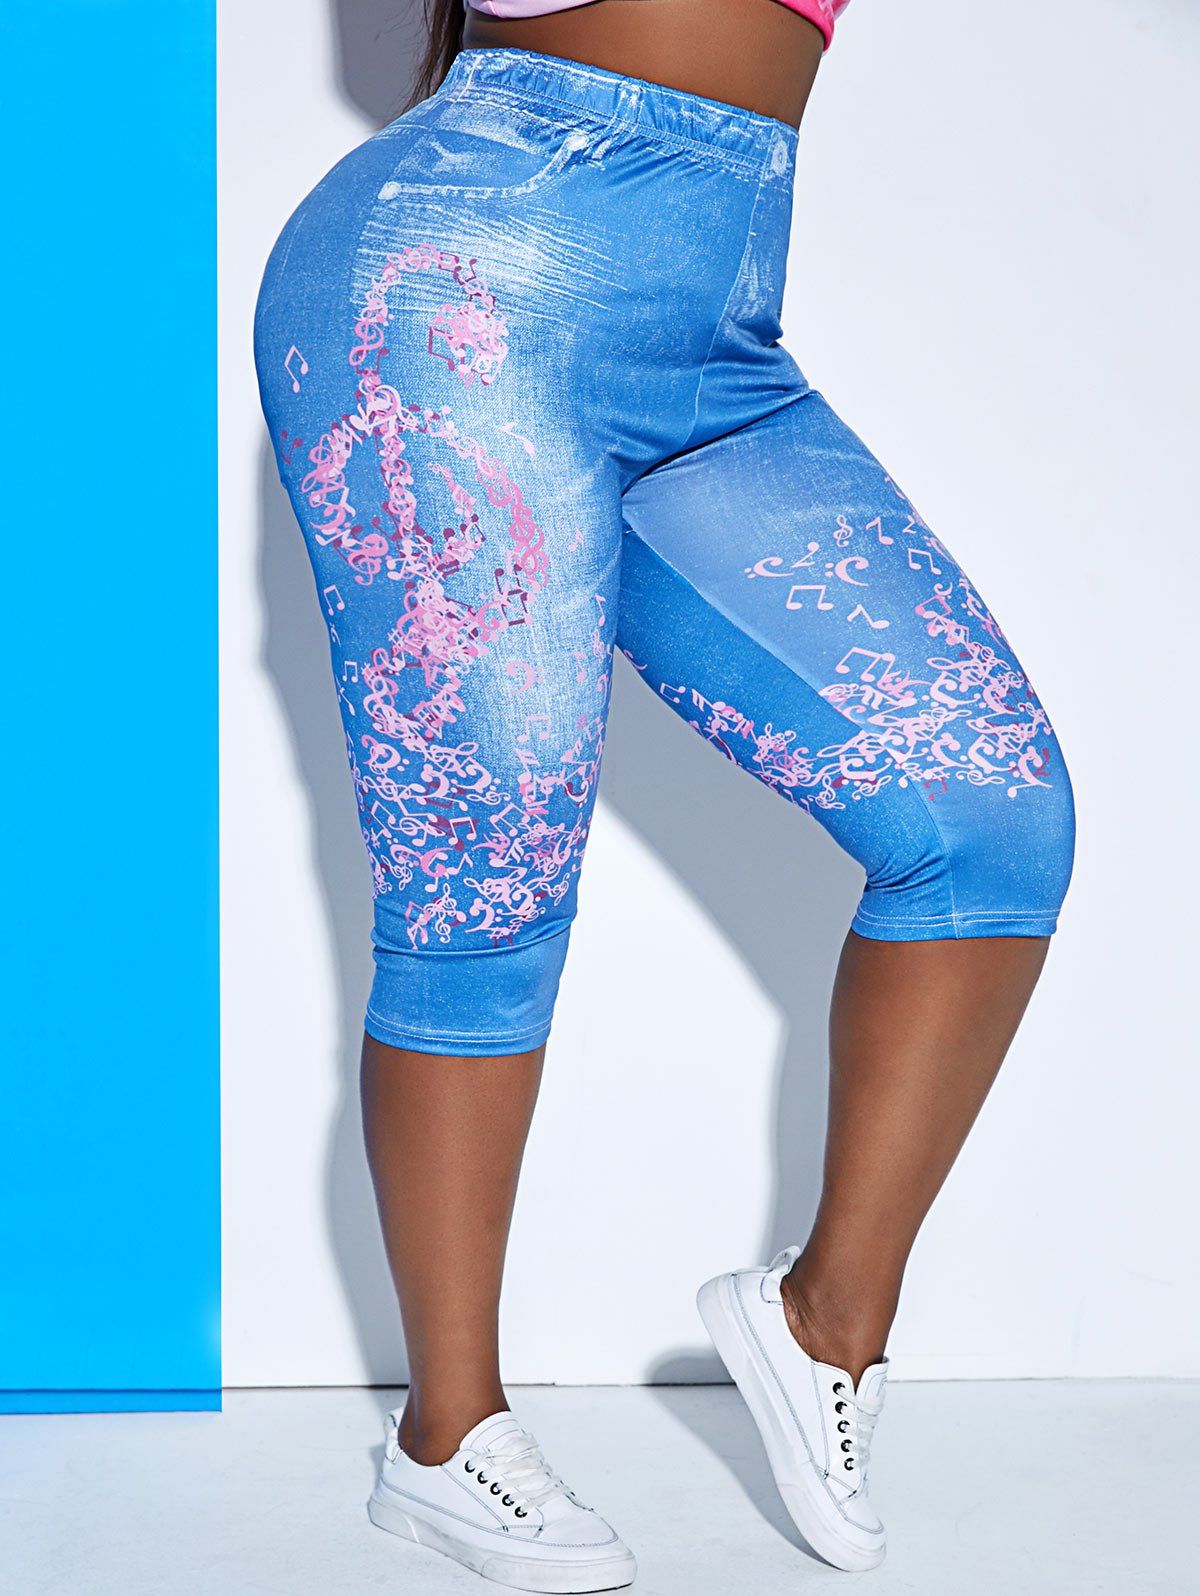 Plus Size Musical Notes Print Cropped Jeggings - BLUE 5X